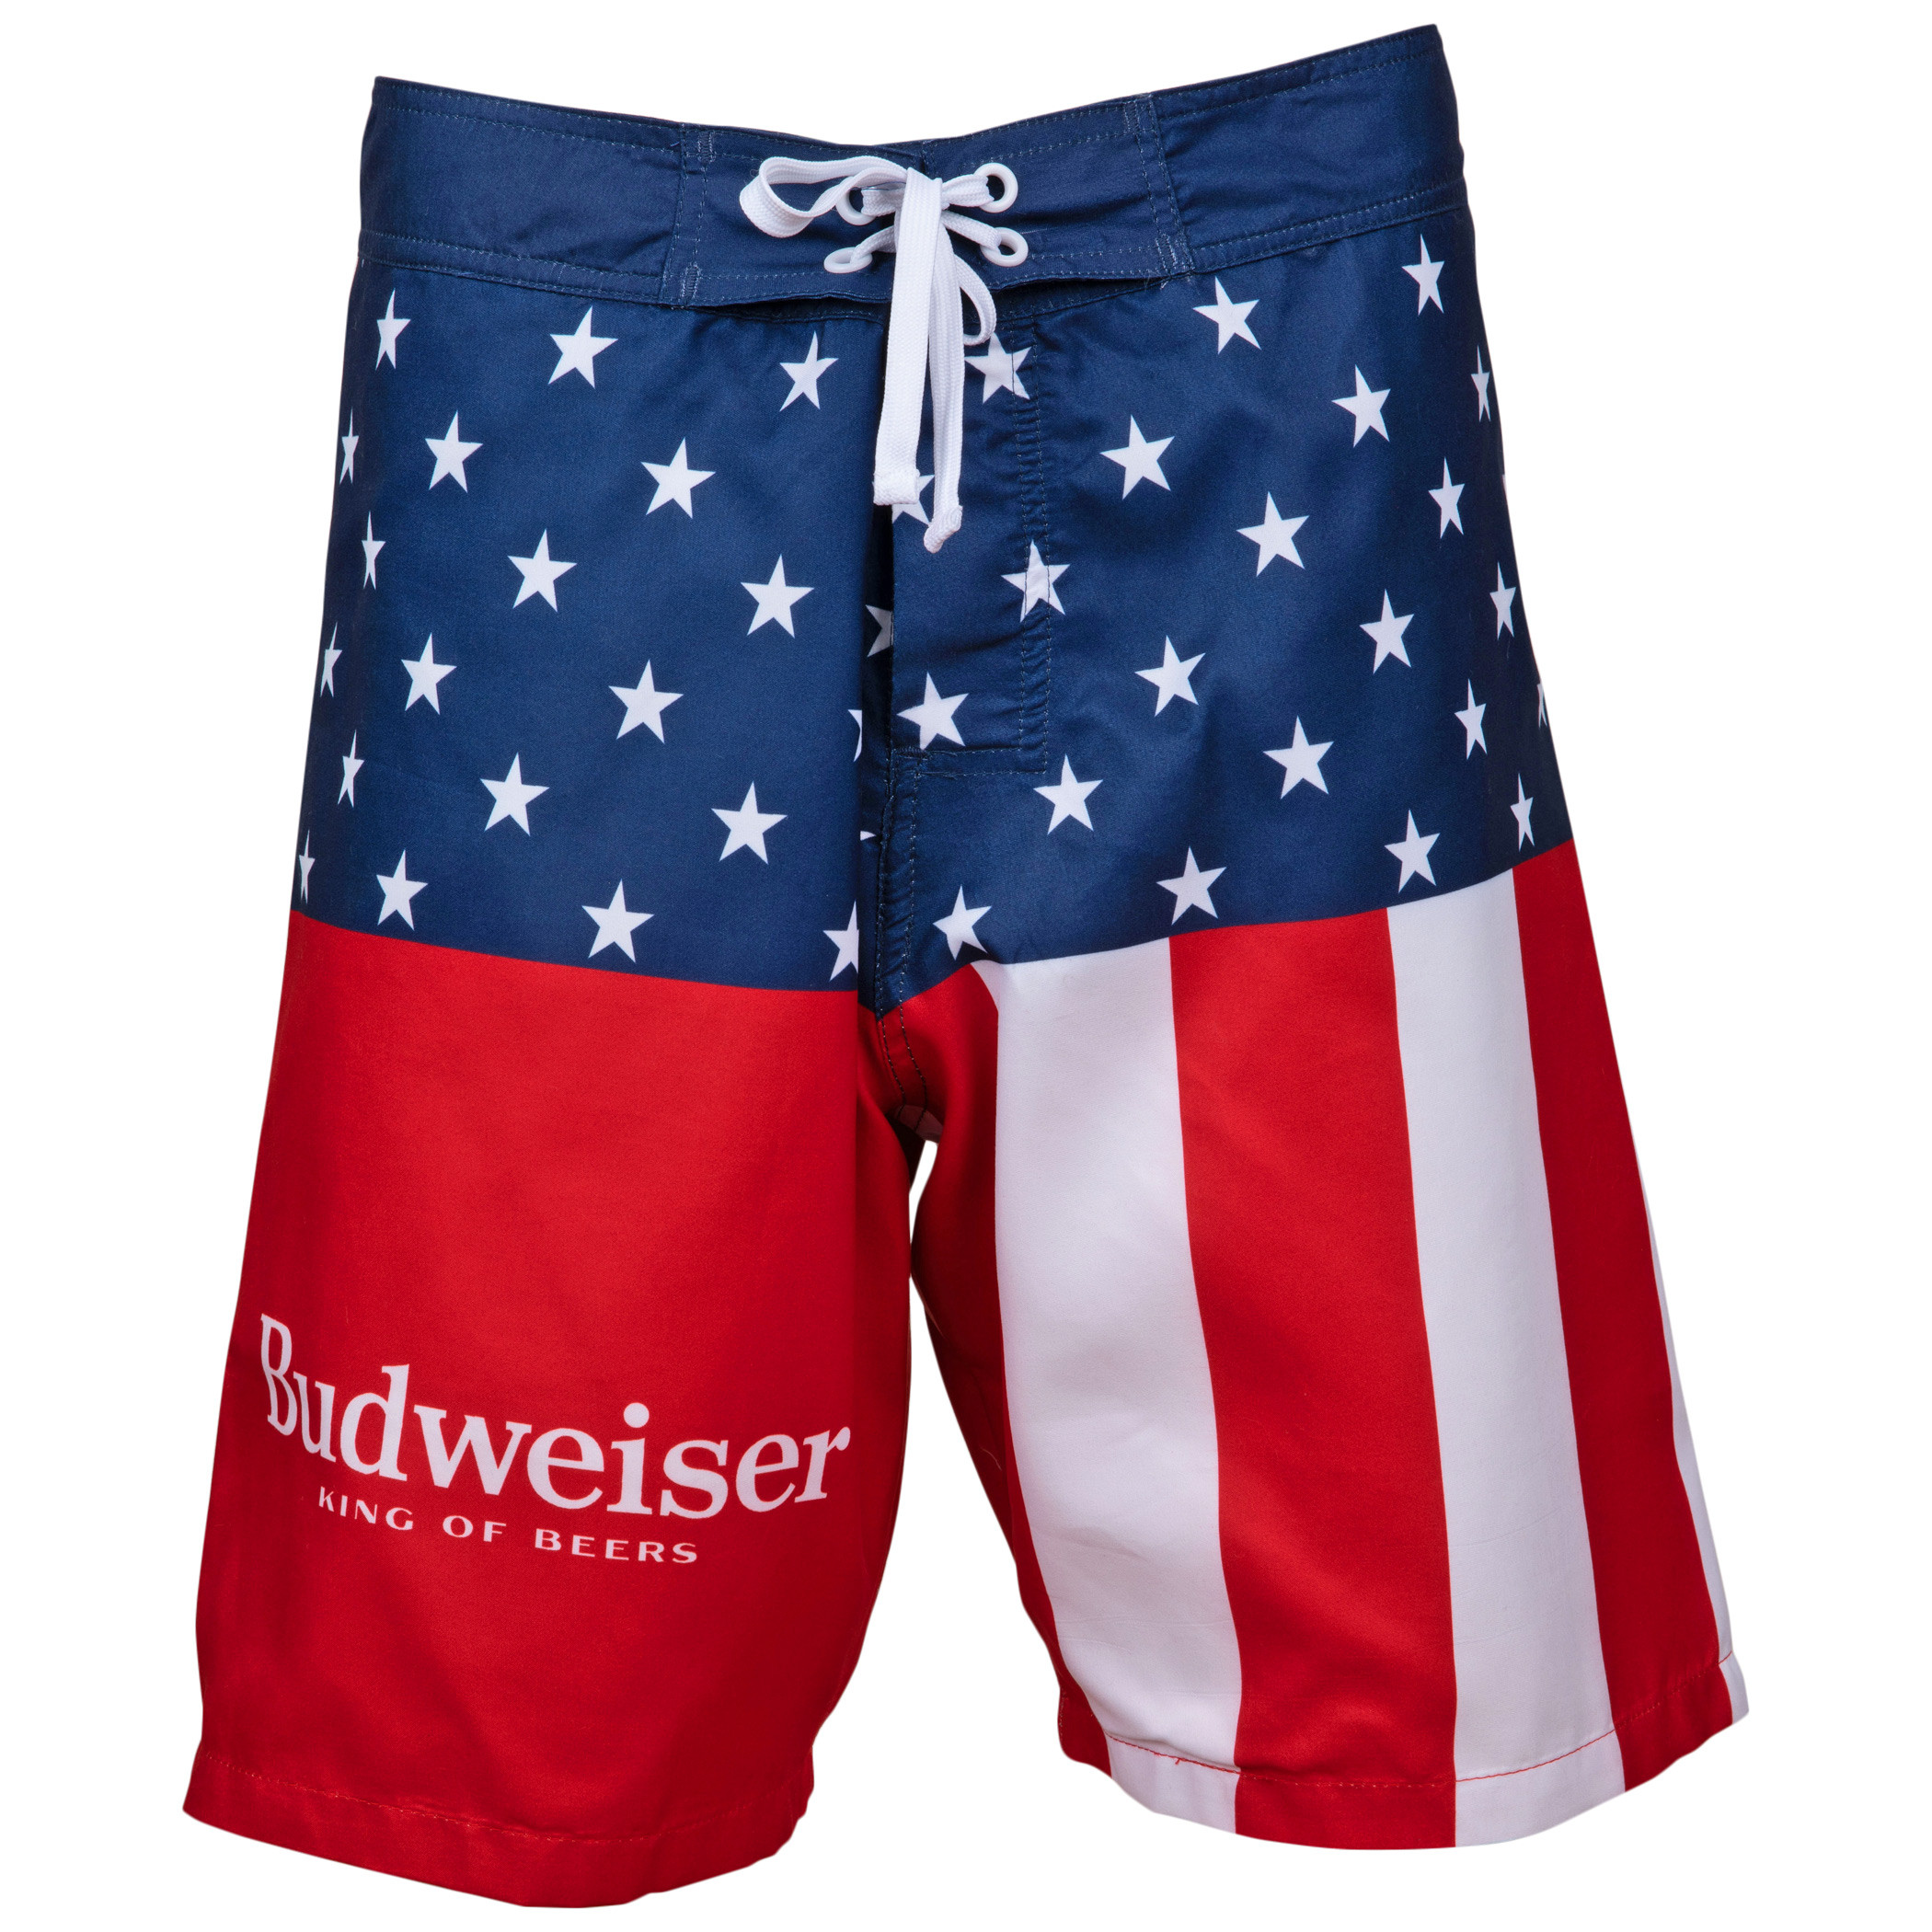 Budweiser King of Beers Stars and Stripes Men's Swim Trunks Board ...